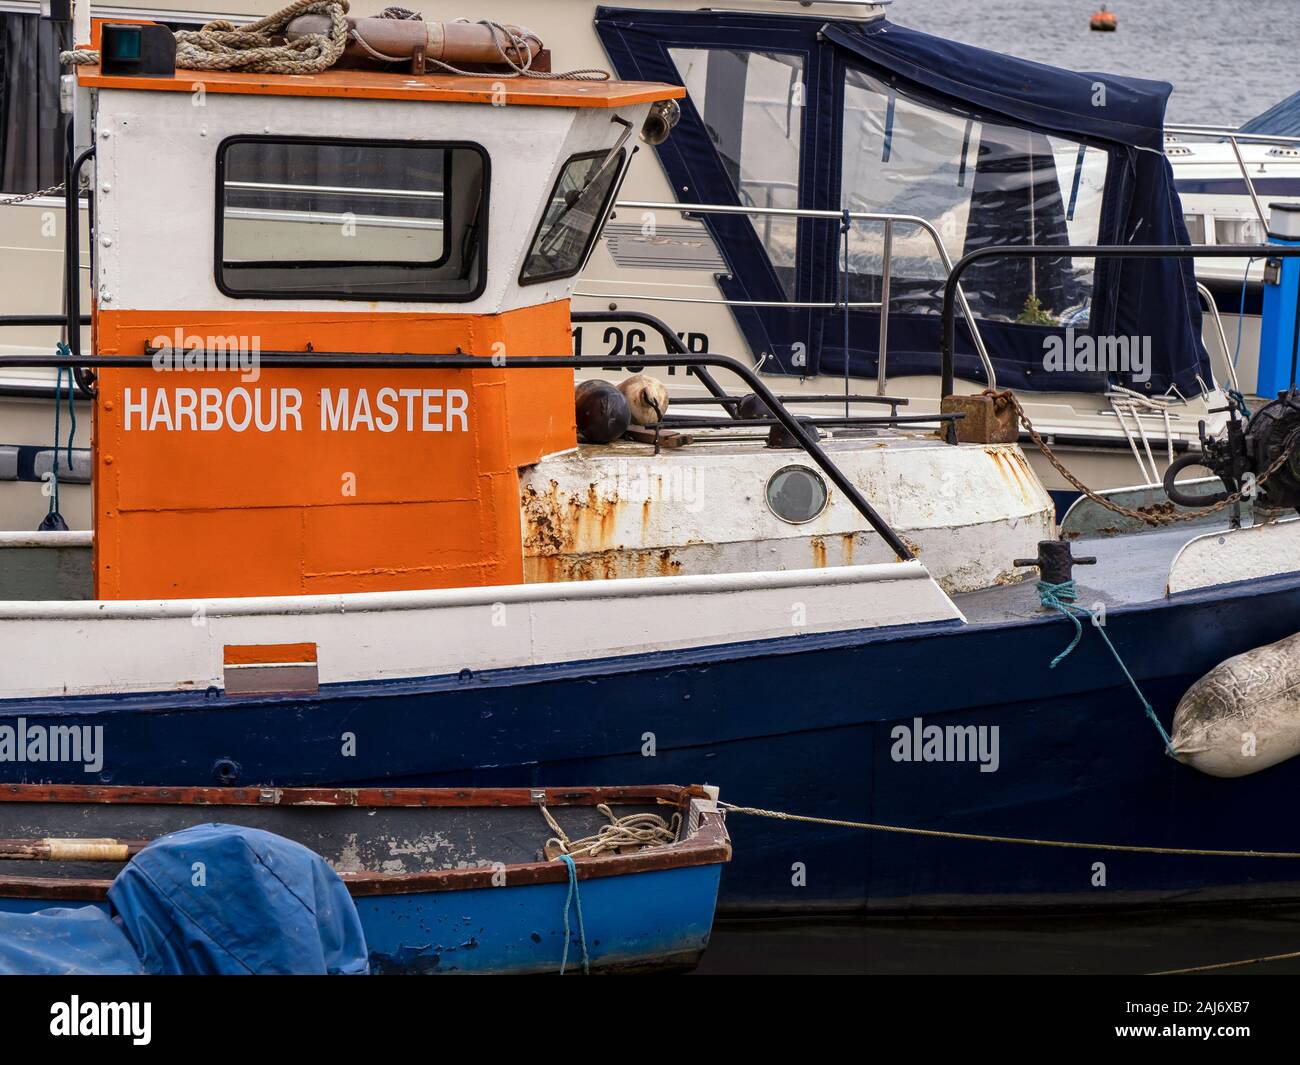 OULTON BROAD, SUFFOLK:  Harbour Master Boat Stock Photo